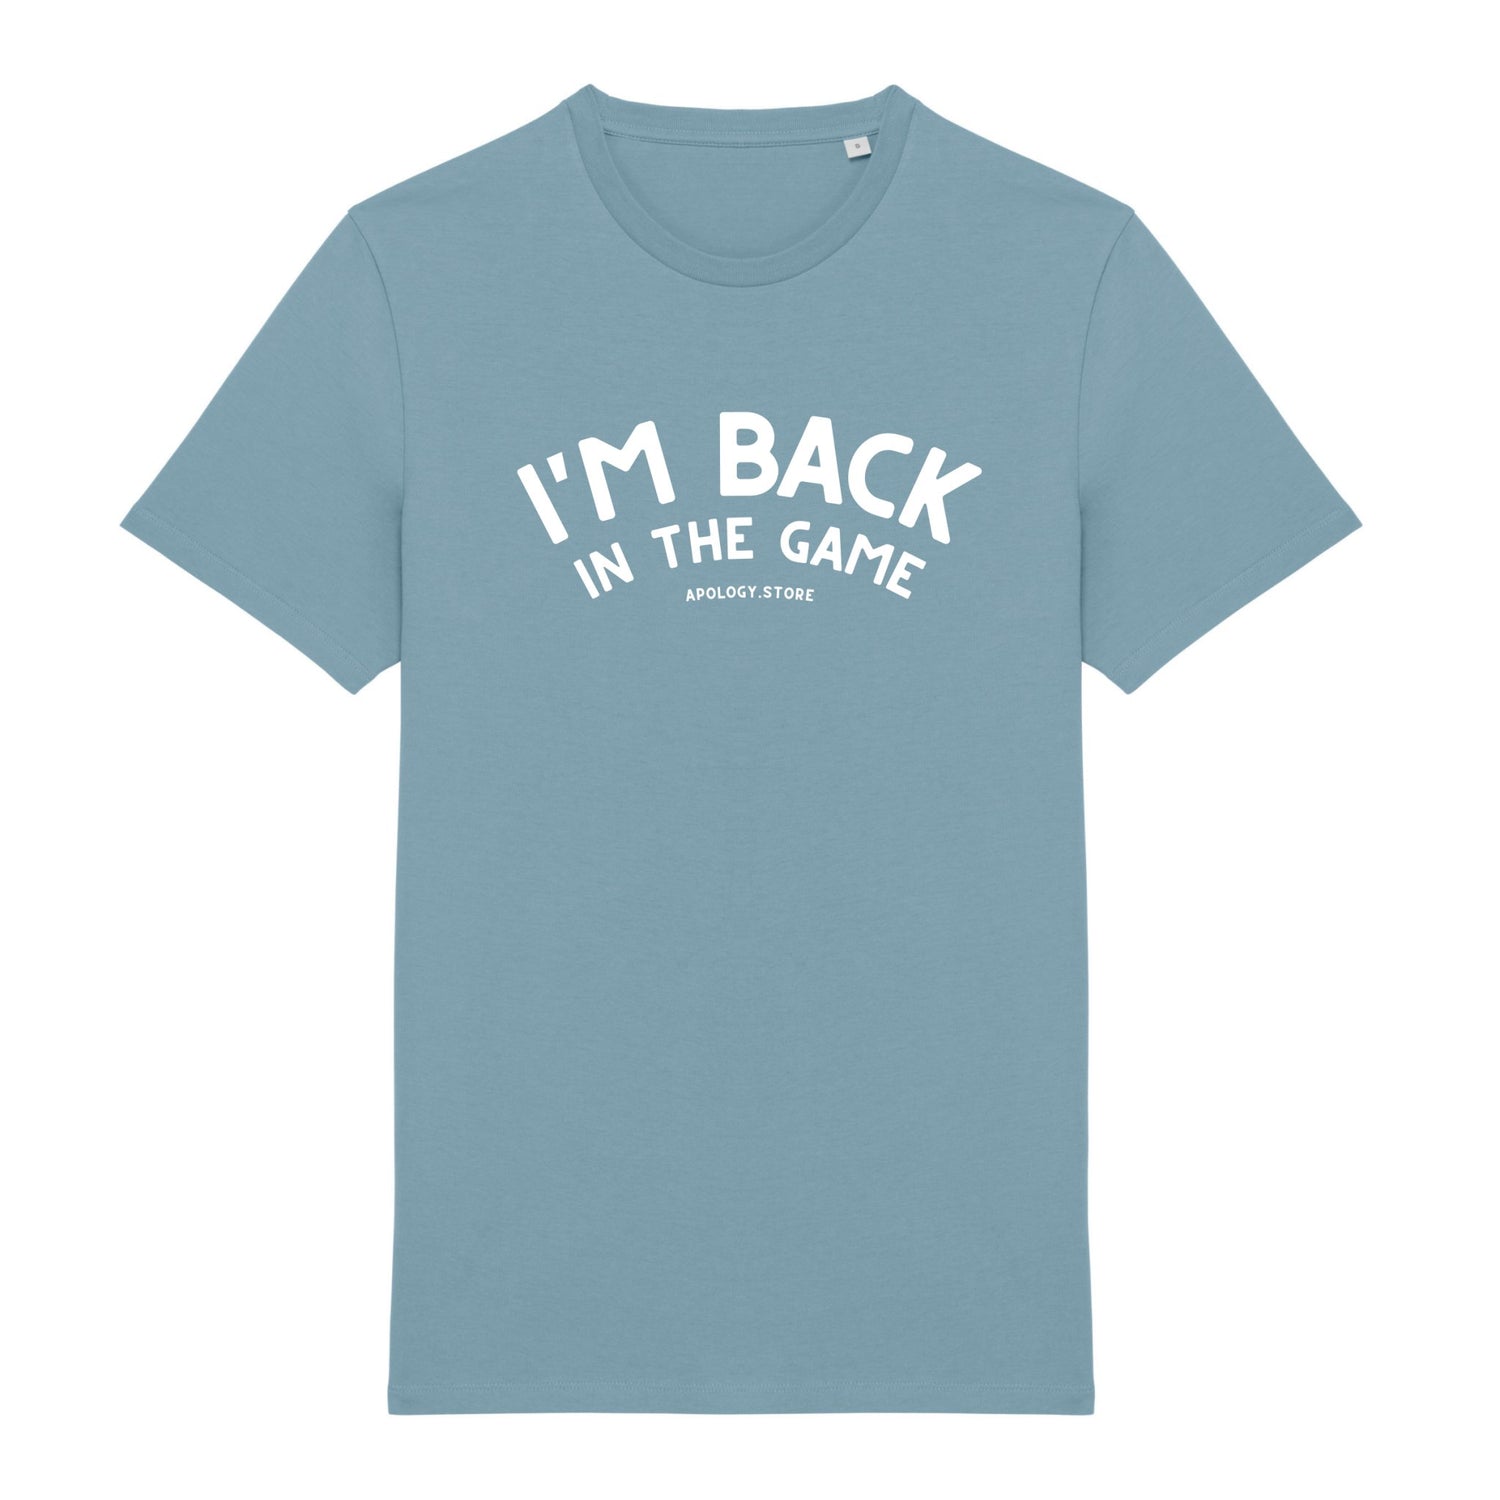 T-shirt I'm Back in The Game - Fabriqué au Portugal - Apology